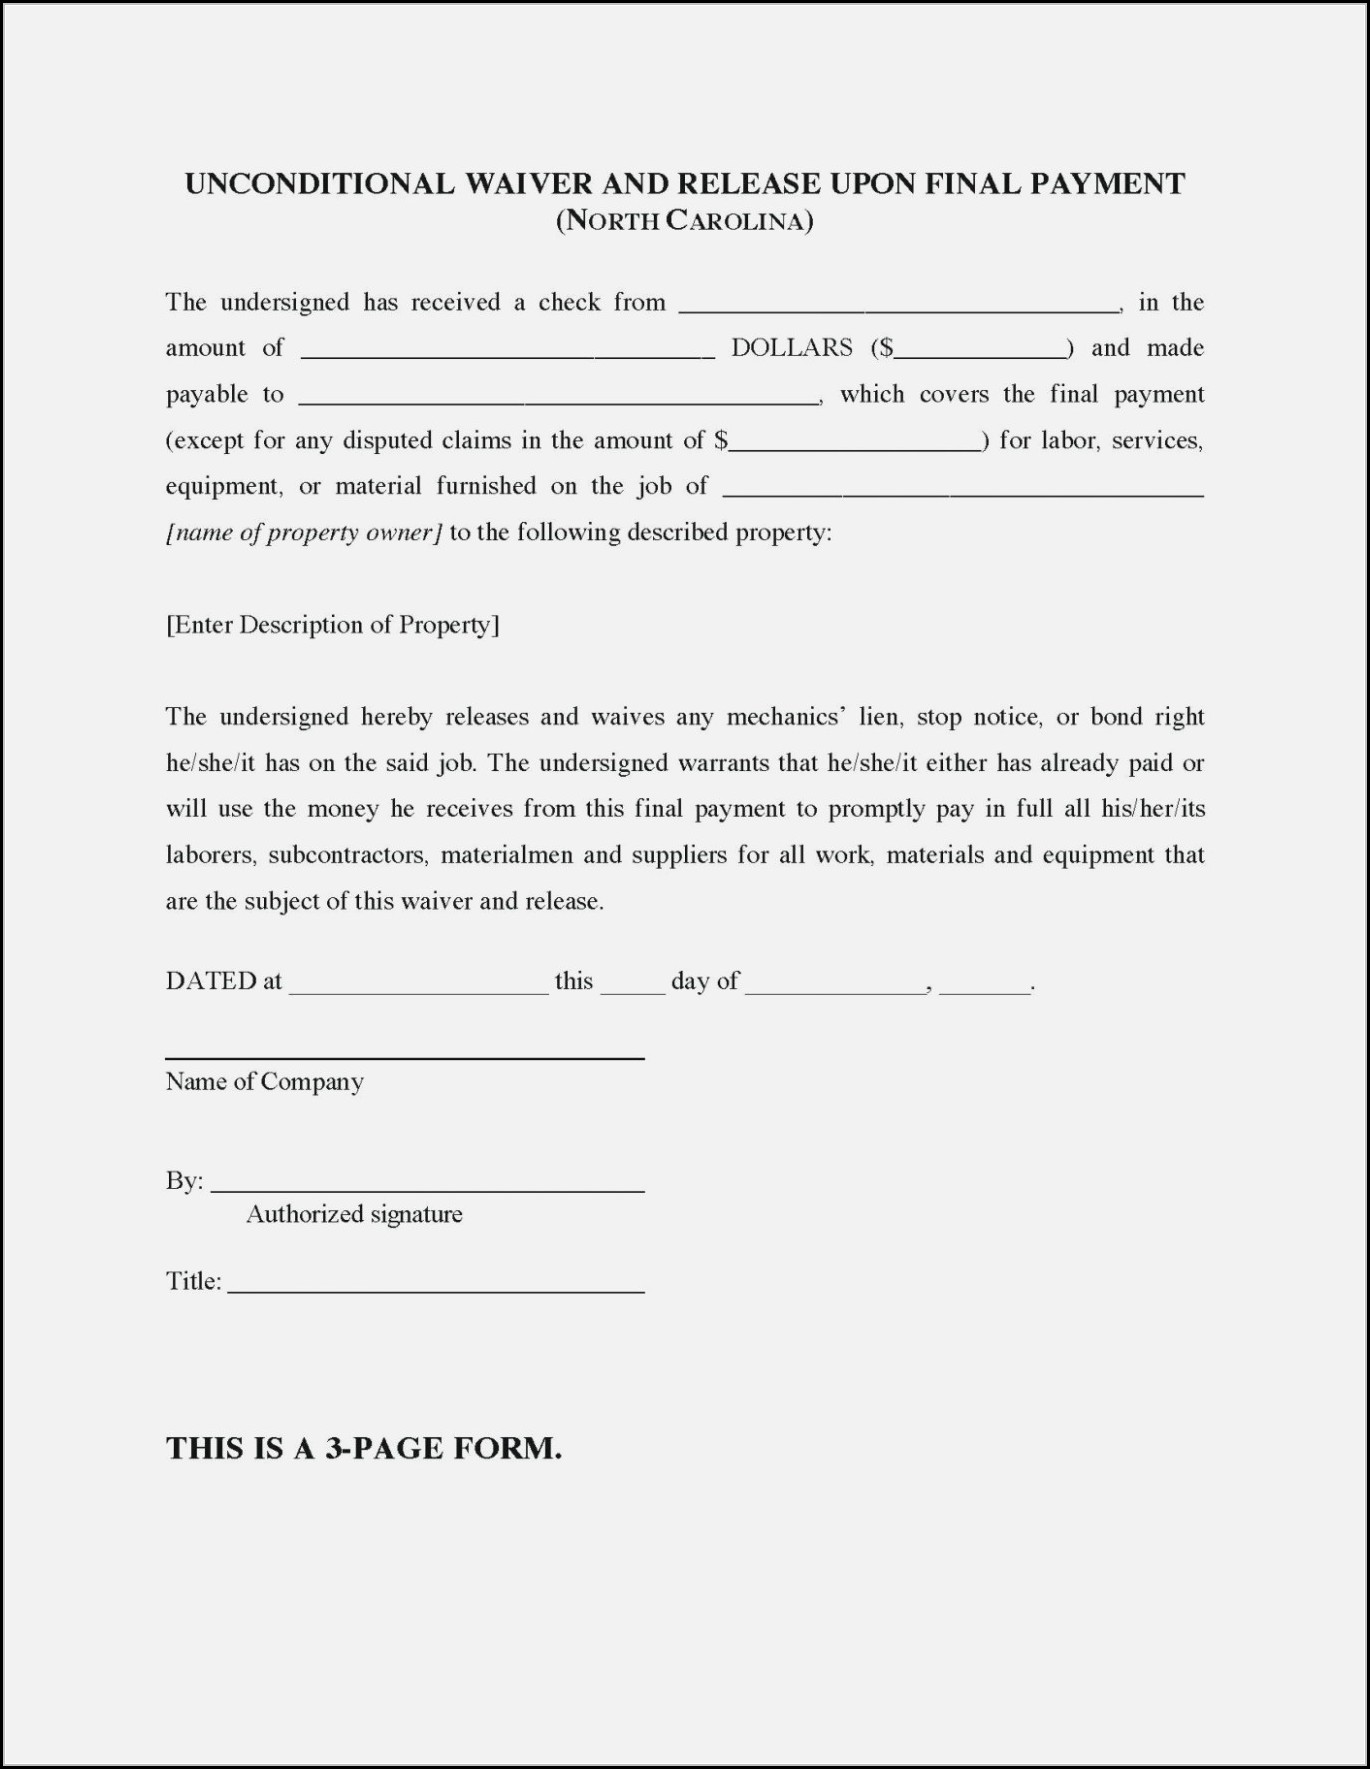 lien-waiver-form-with-notary-form-resume-examples-pw1gawg3yz